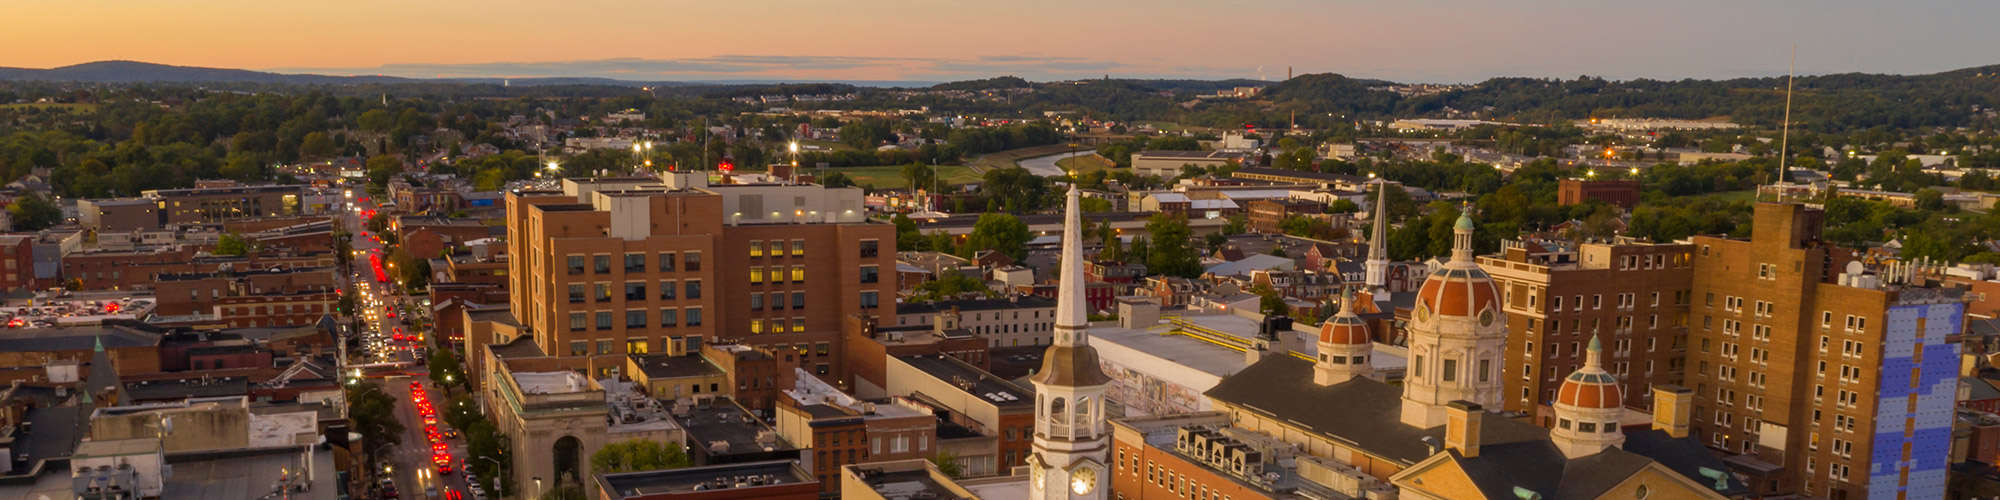 An aerial view of downtown York, PA, at sunset.